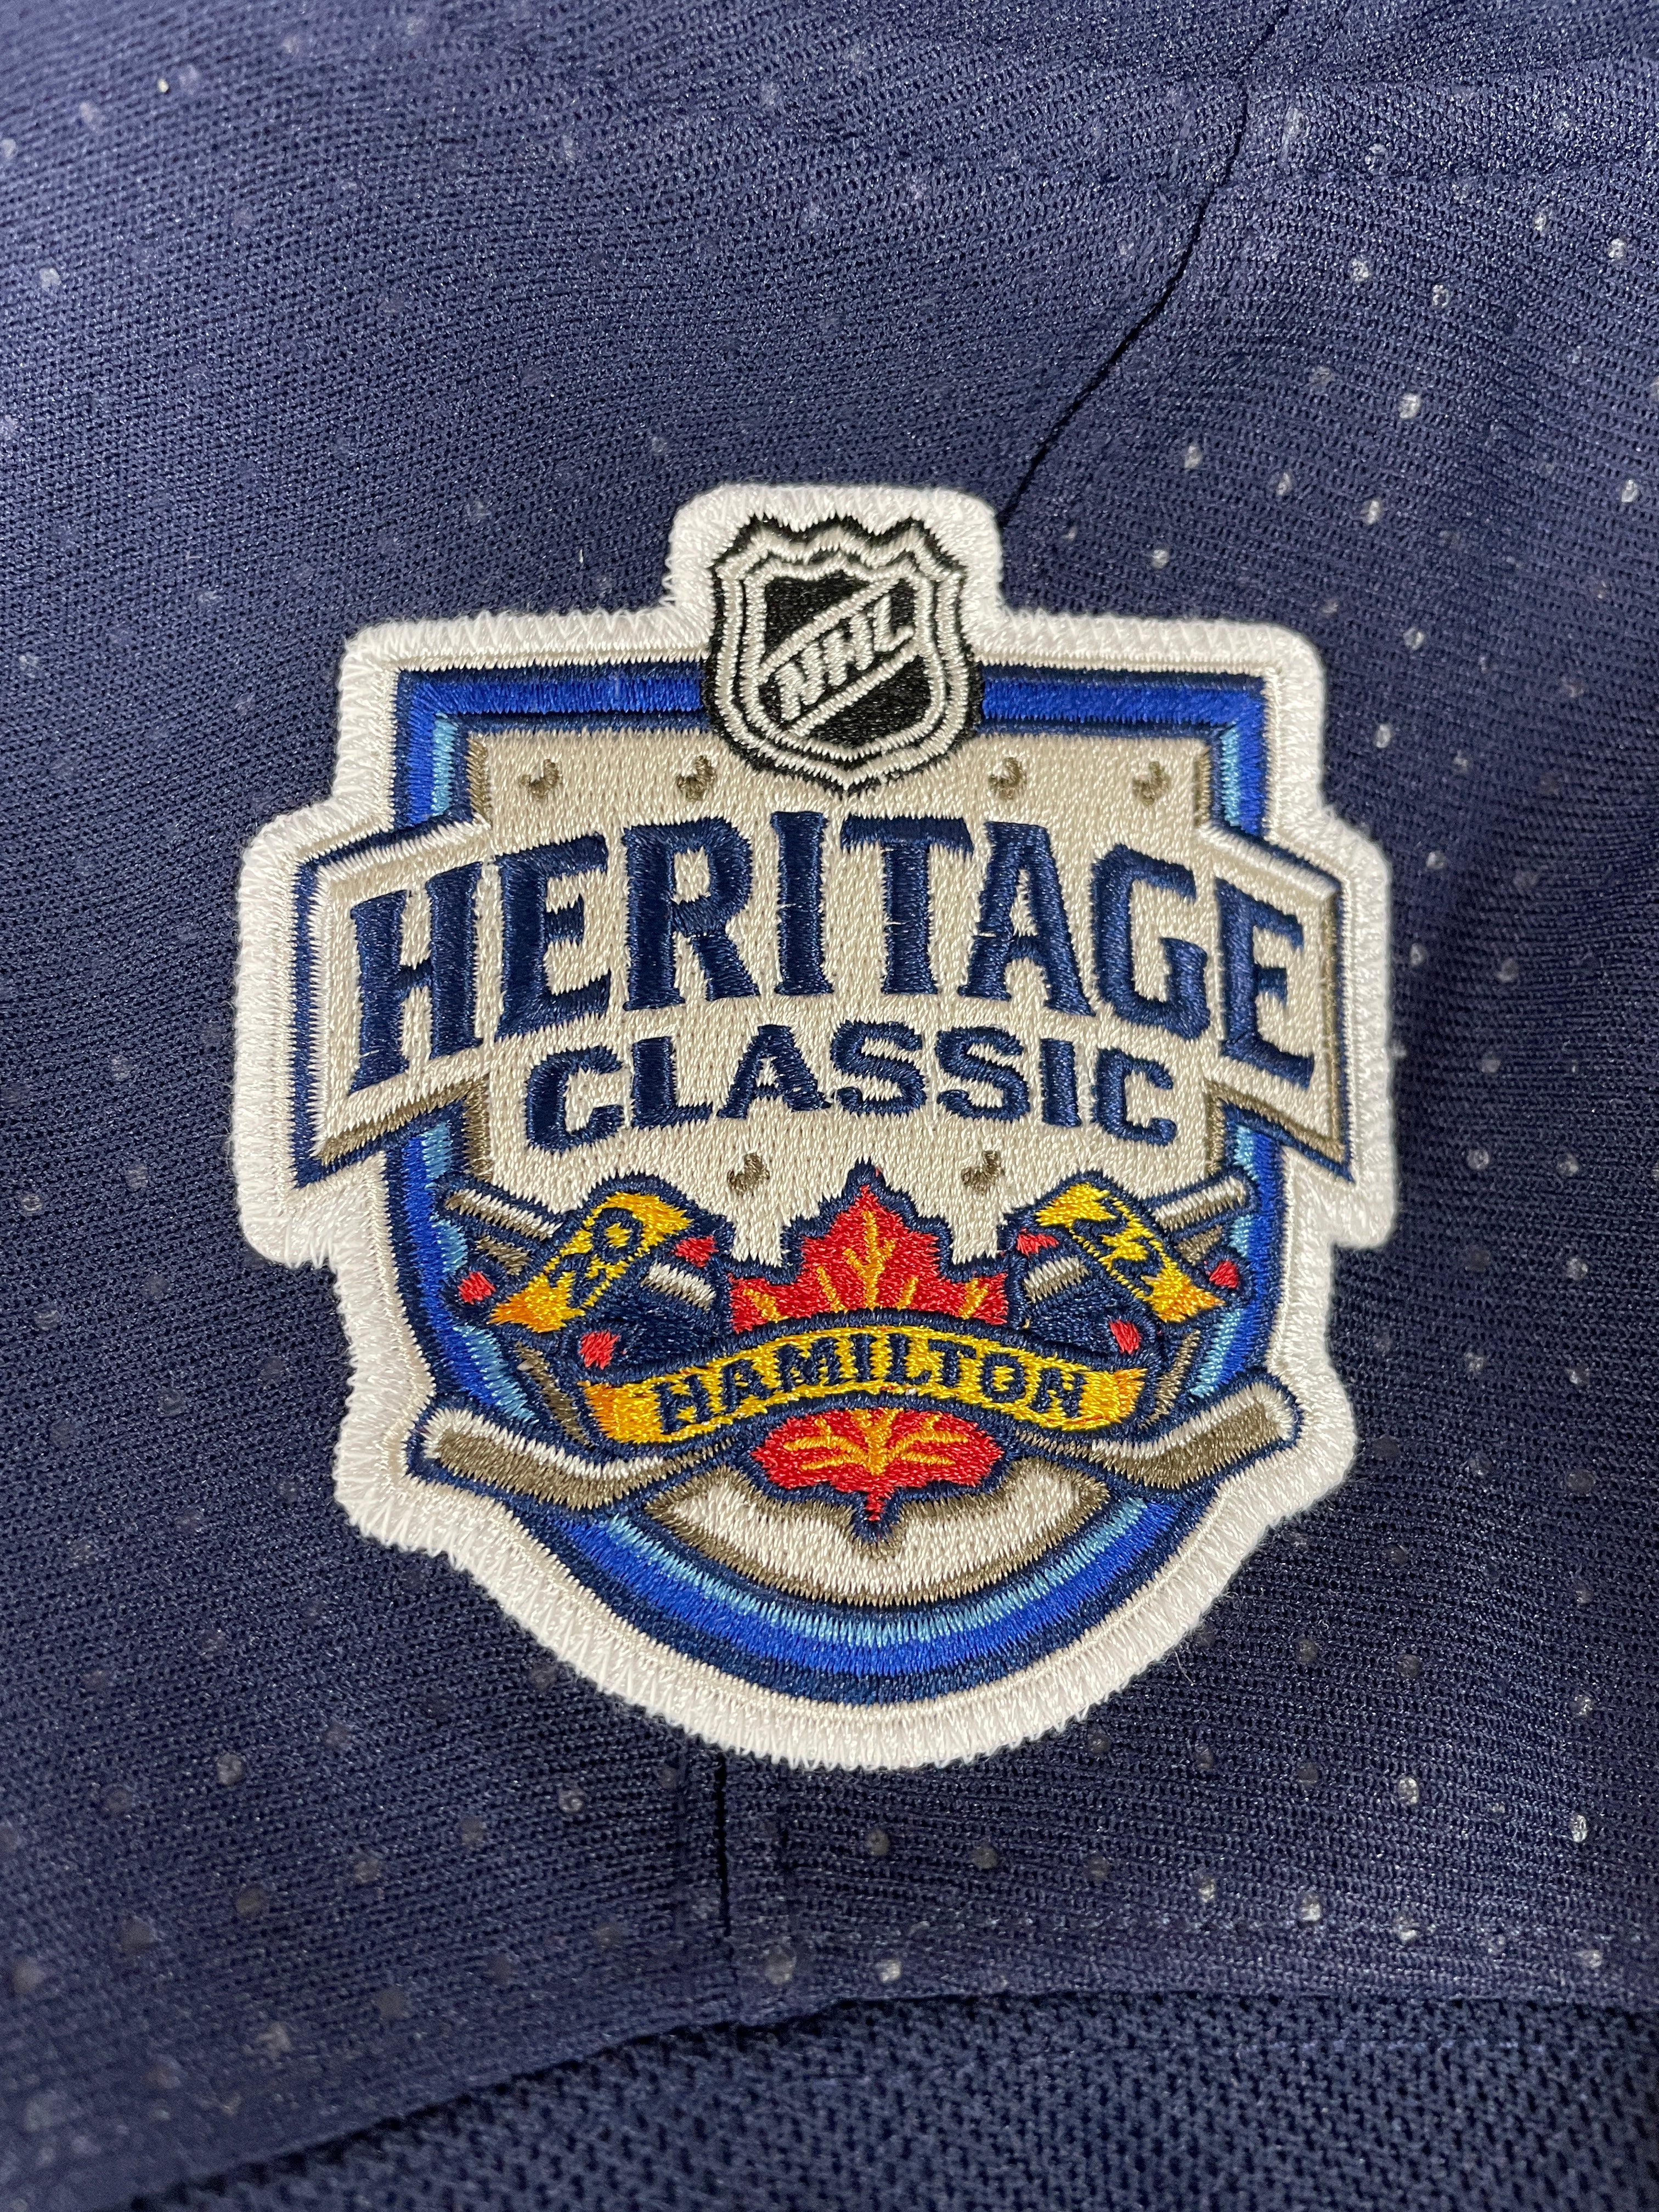 2022 Heritage Classic NHL Hockey Jersey Patch Toronto Maple Leafs